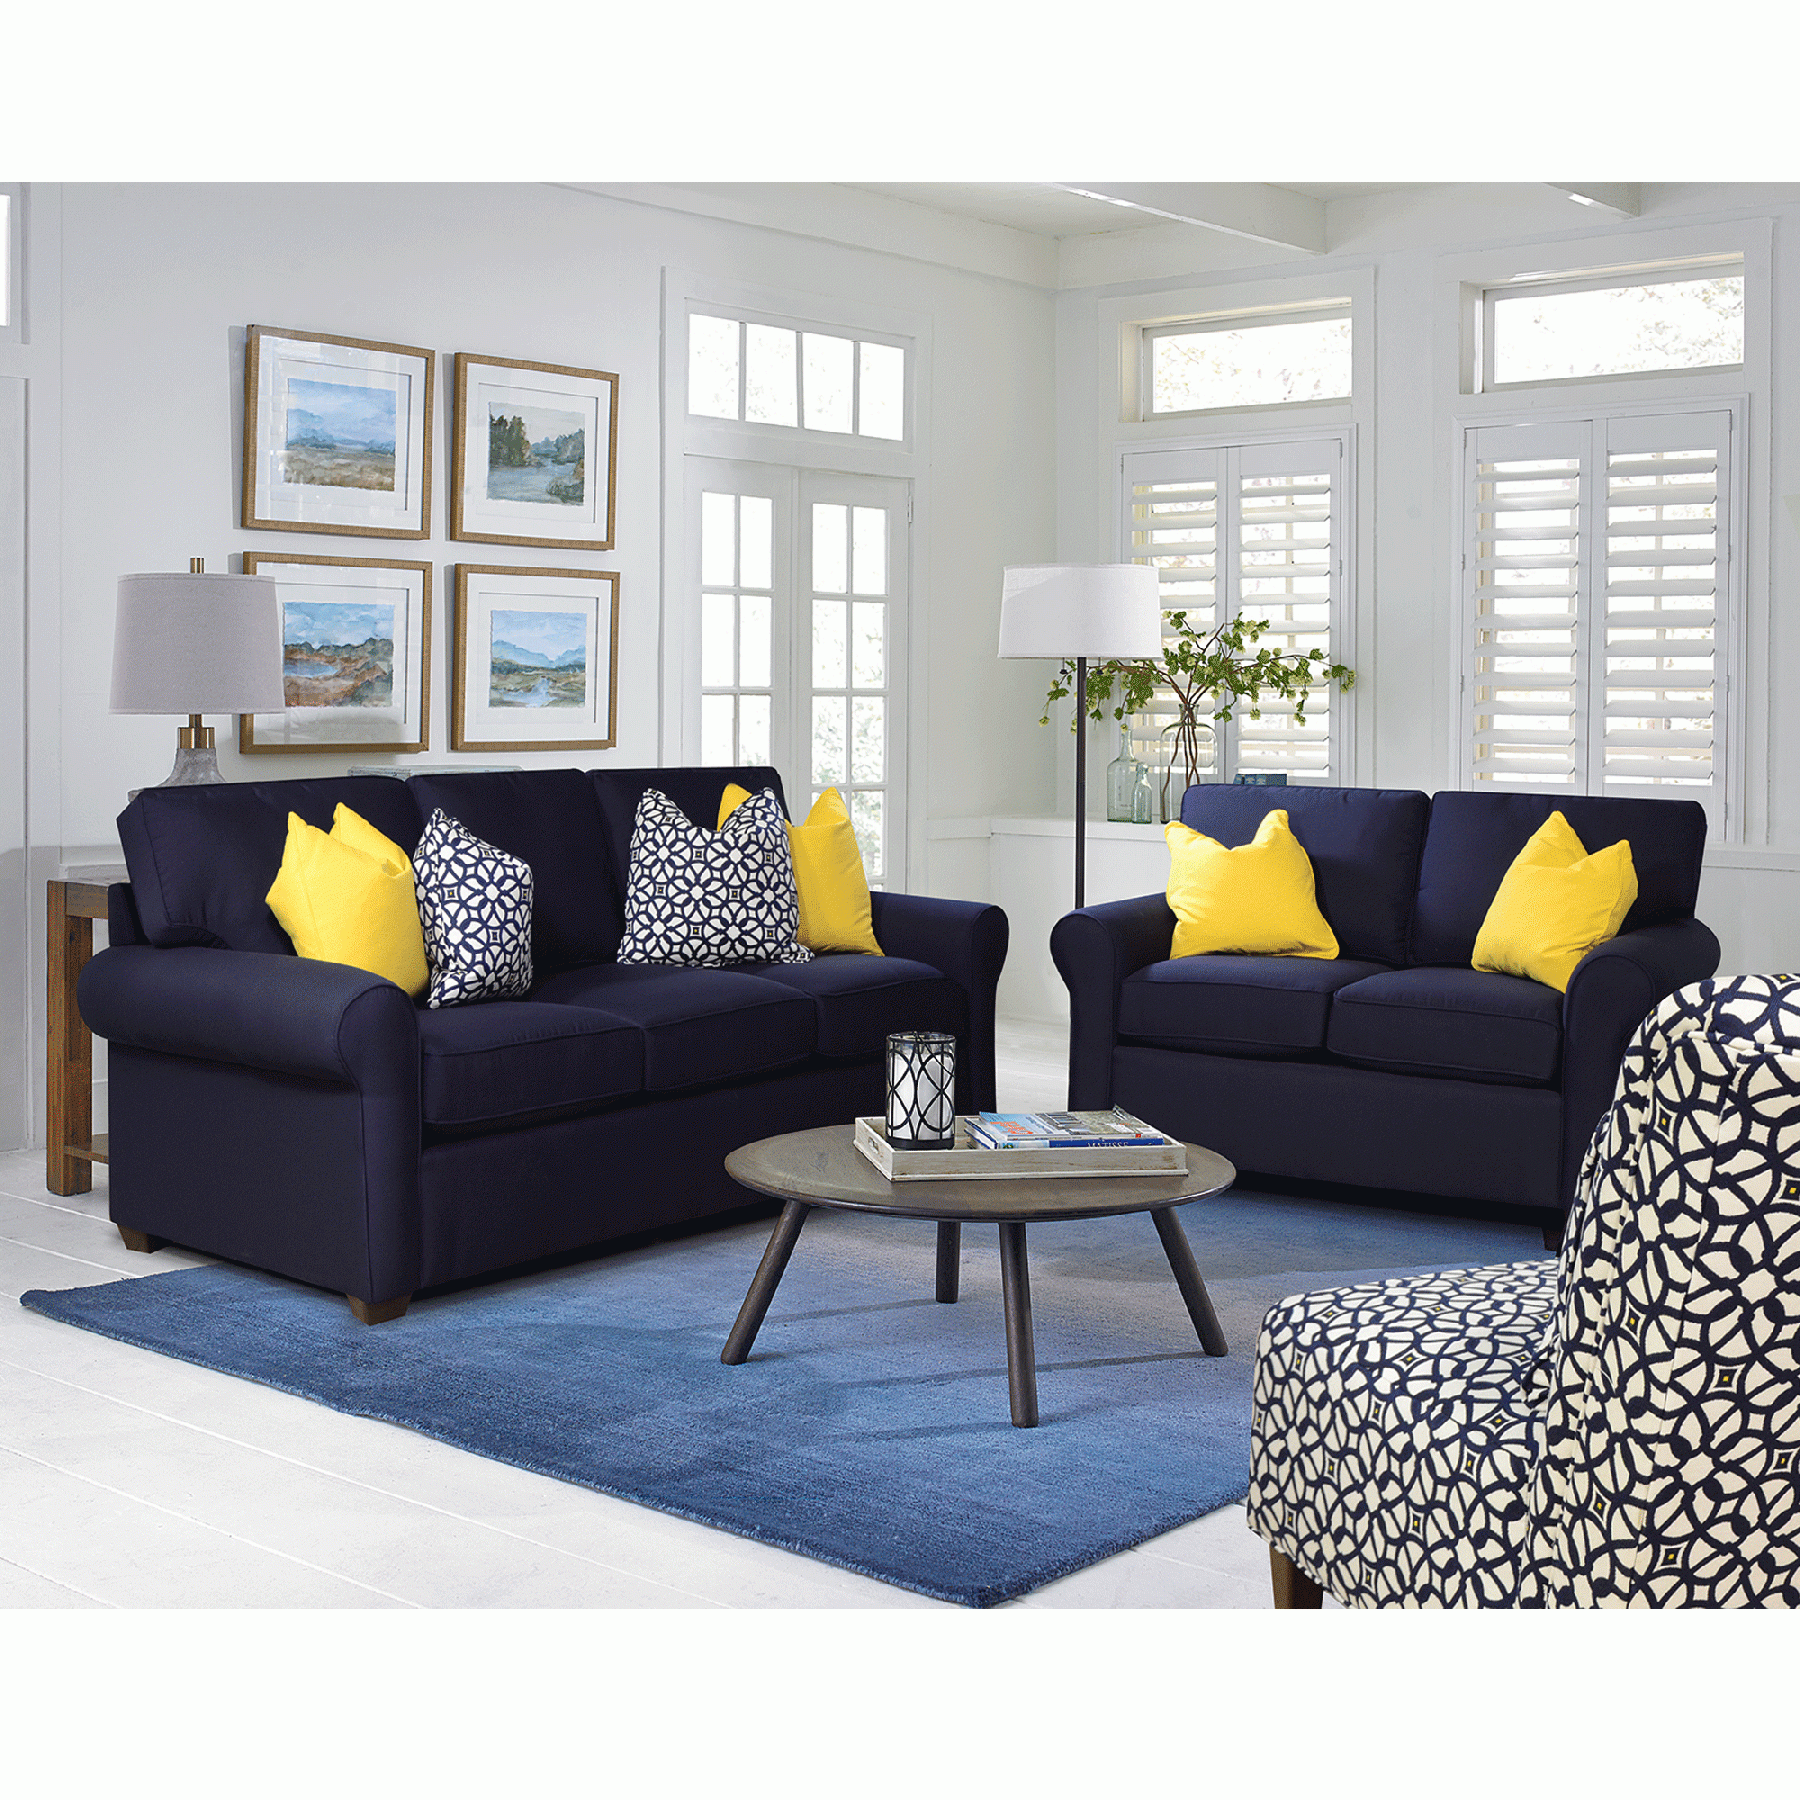 You'll Adore The Casual Comfort You'll Get From This Sunbrella Navy Throughout Navy Sleeper Sofa Couches (View 5 of 20)